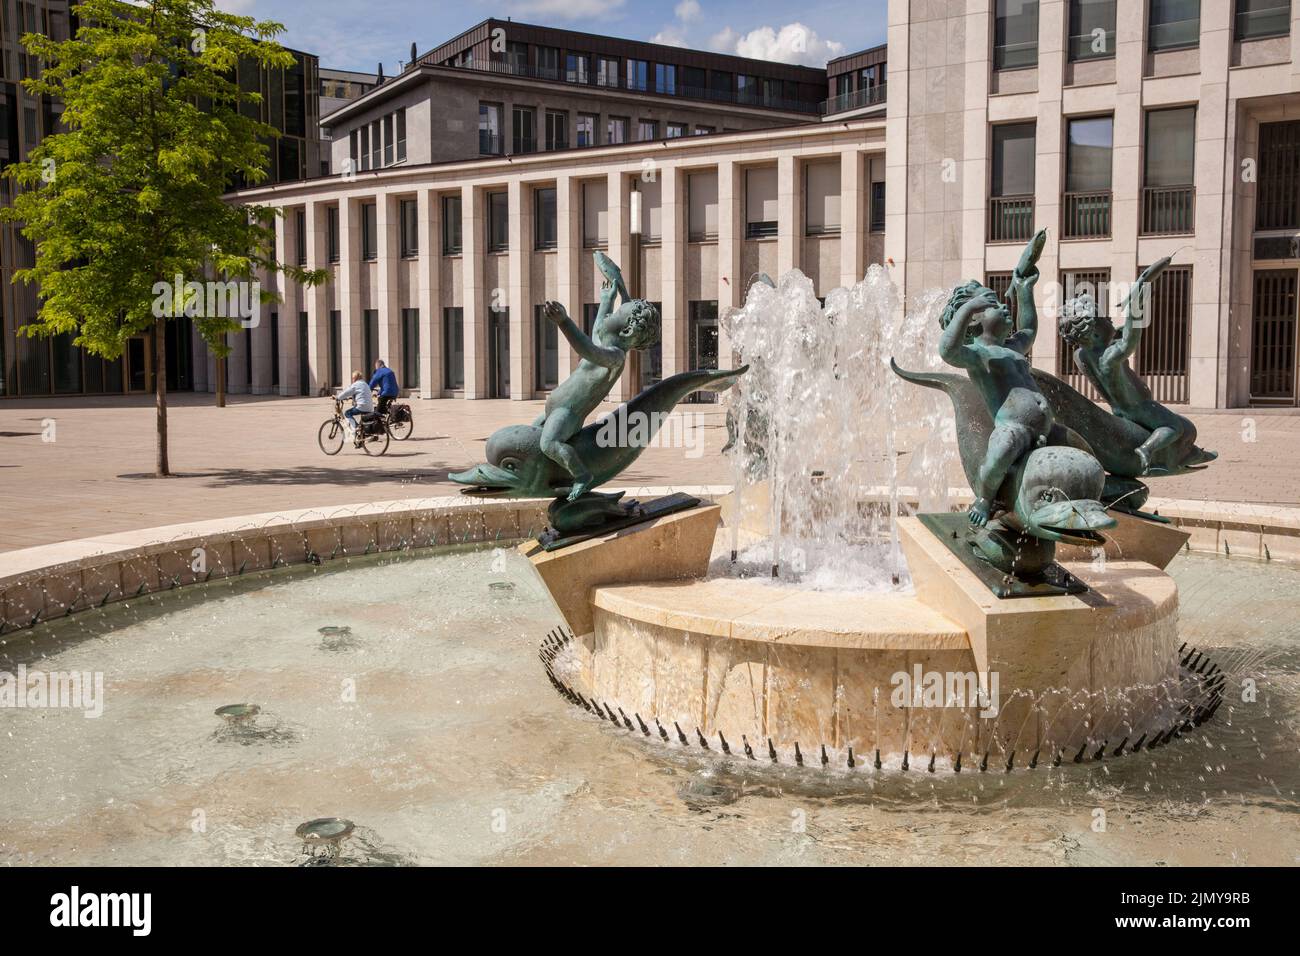 the Gerling Quartier, fountain with four boys riding on dolphins by artist Arno Breker at the Gereonshof, Cologne, Germany. das Gerling Quartier, Brun Stock Photo